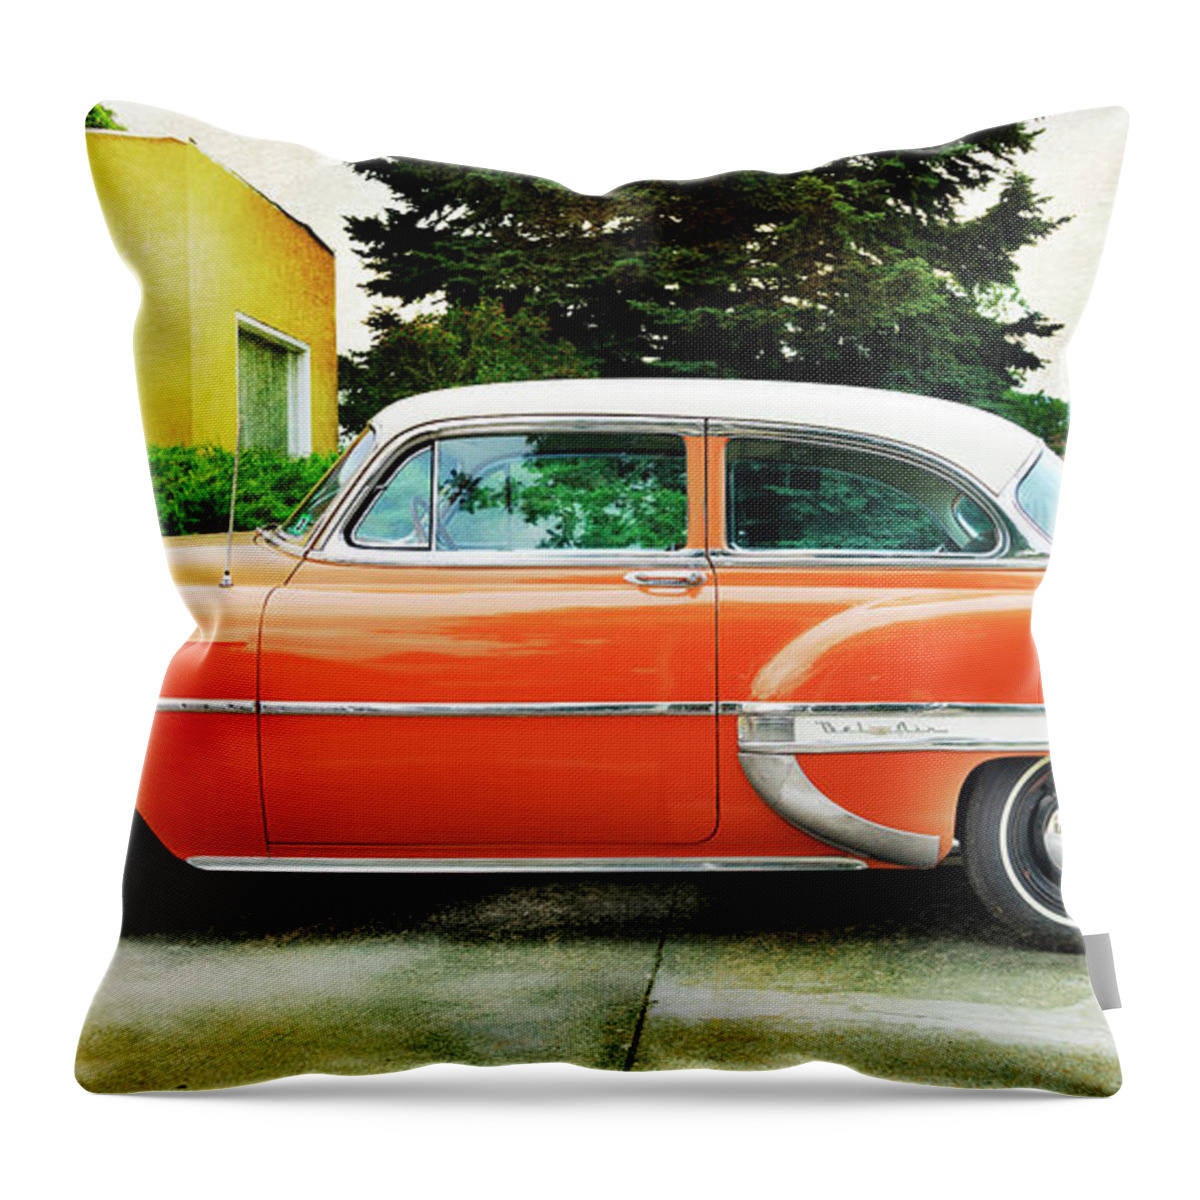 Auto Throw Pillow featuring the photograph 1954 Belair Chevrolet 2 by Craig J Satterlee